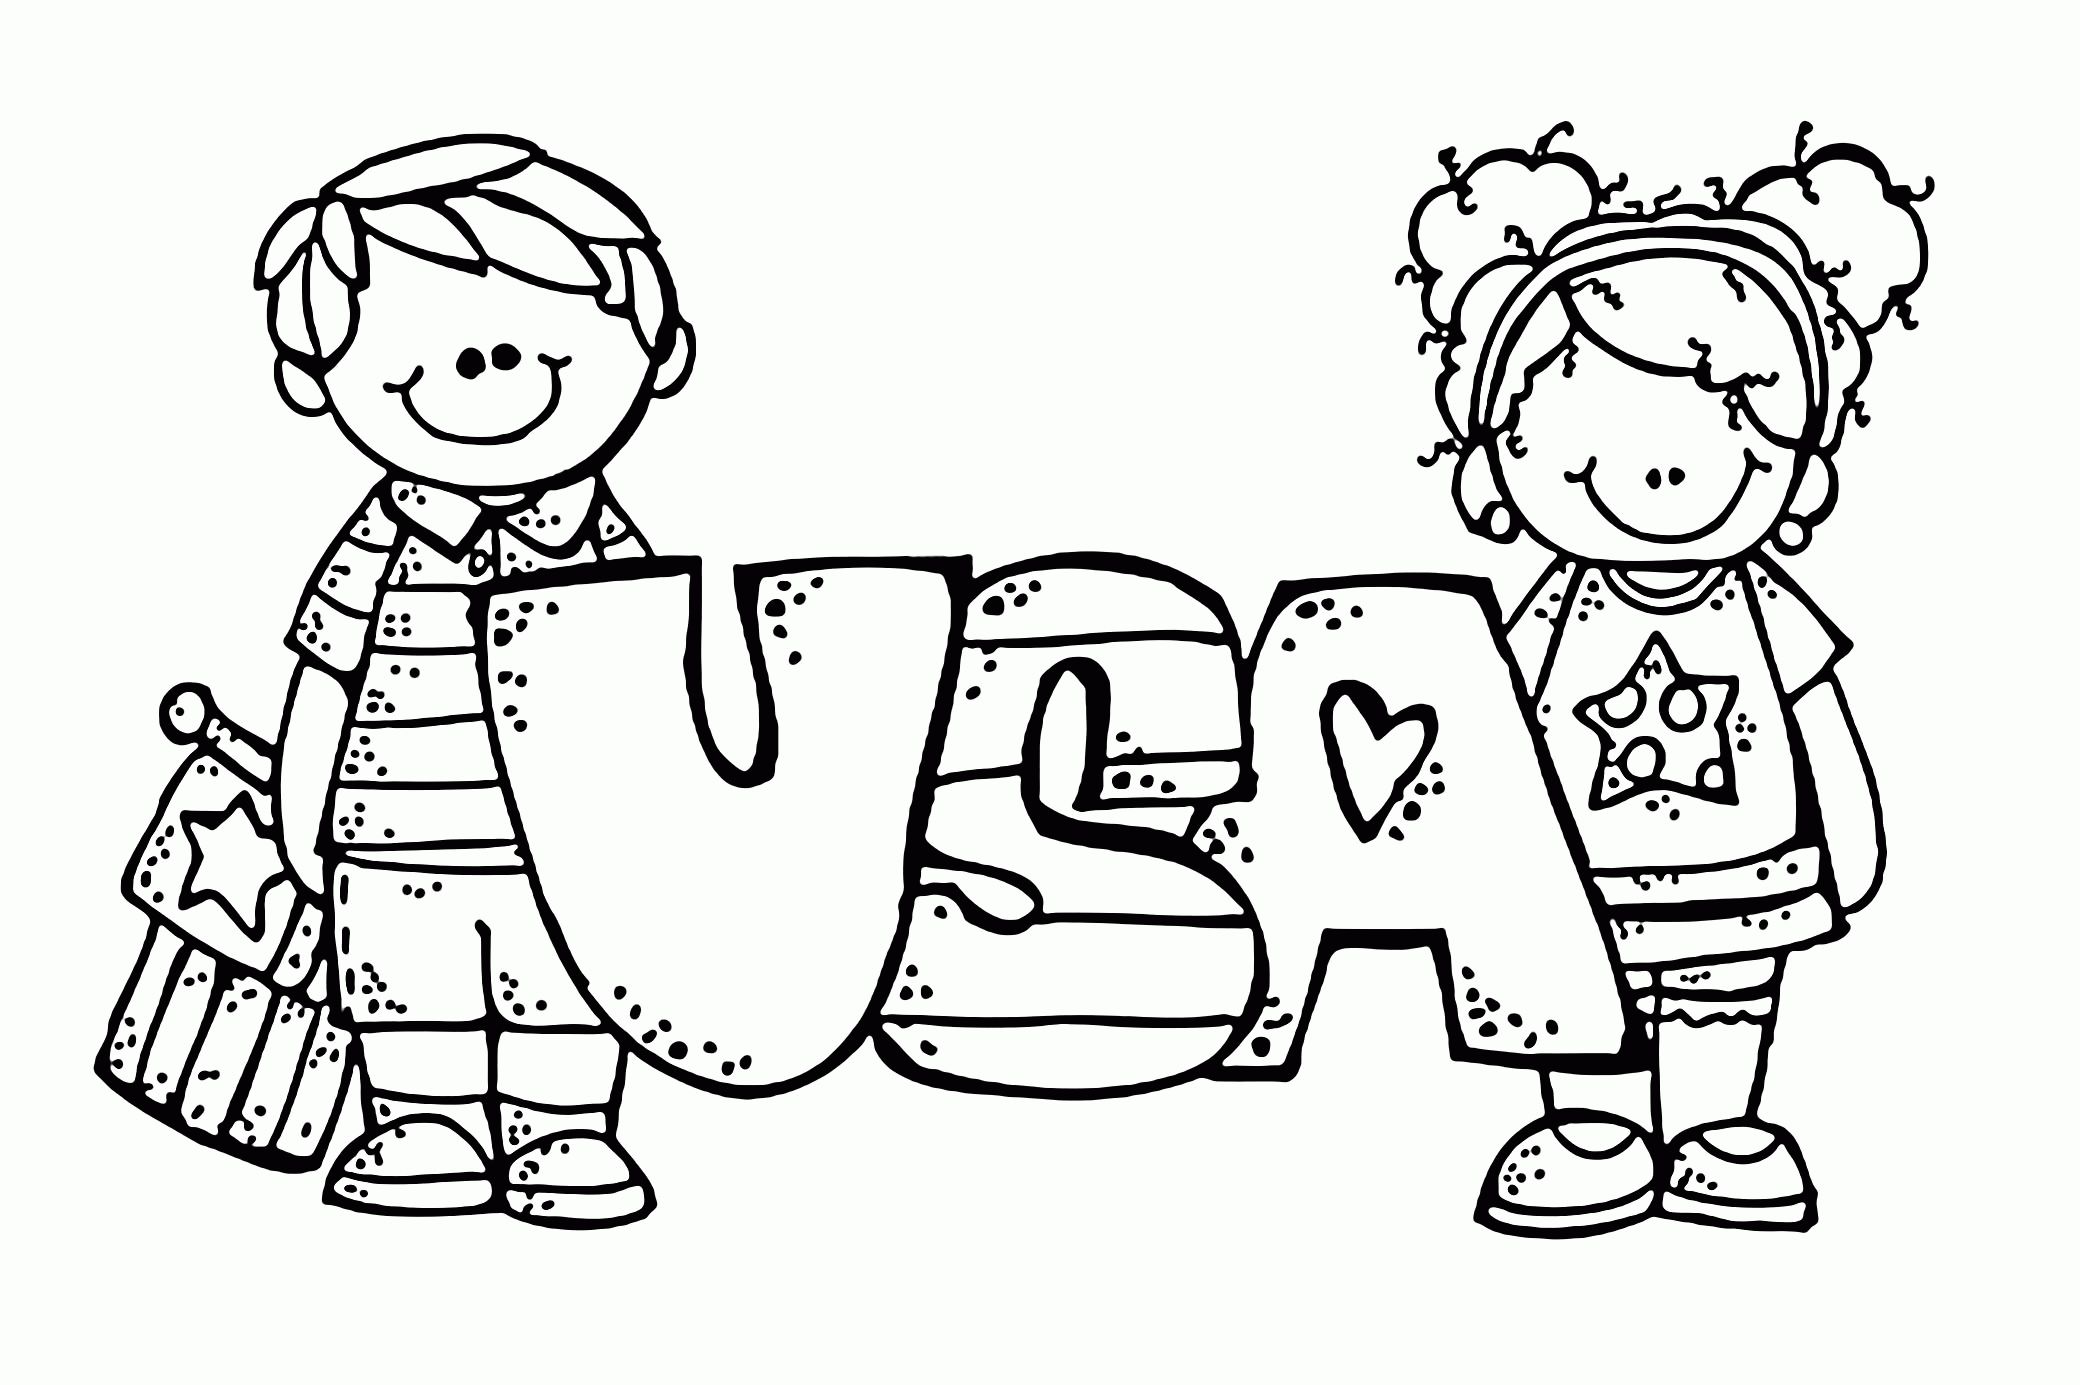 independence-day-coloring-sheets-coloring-pages